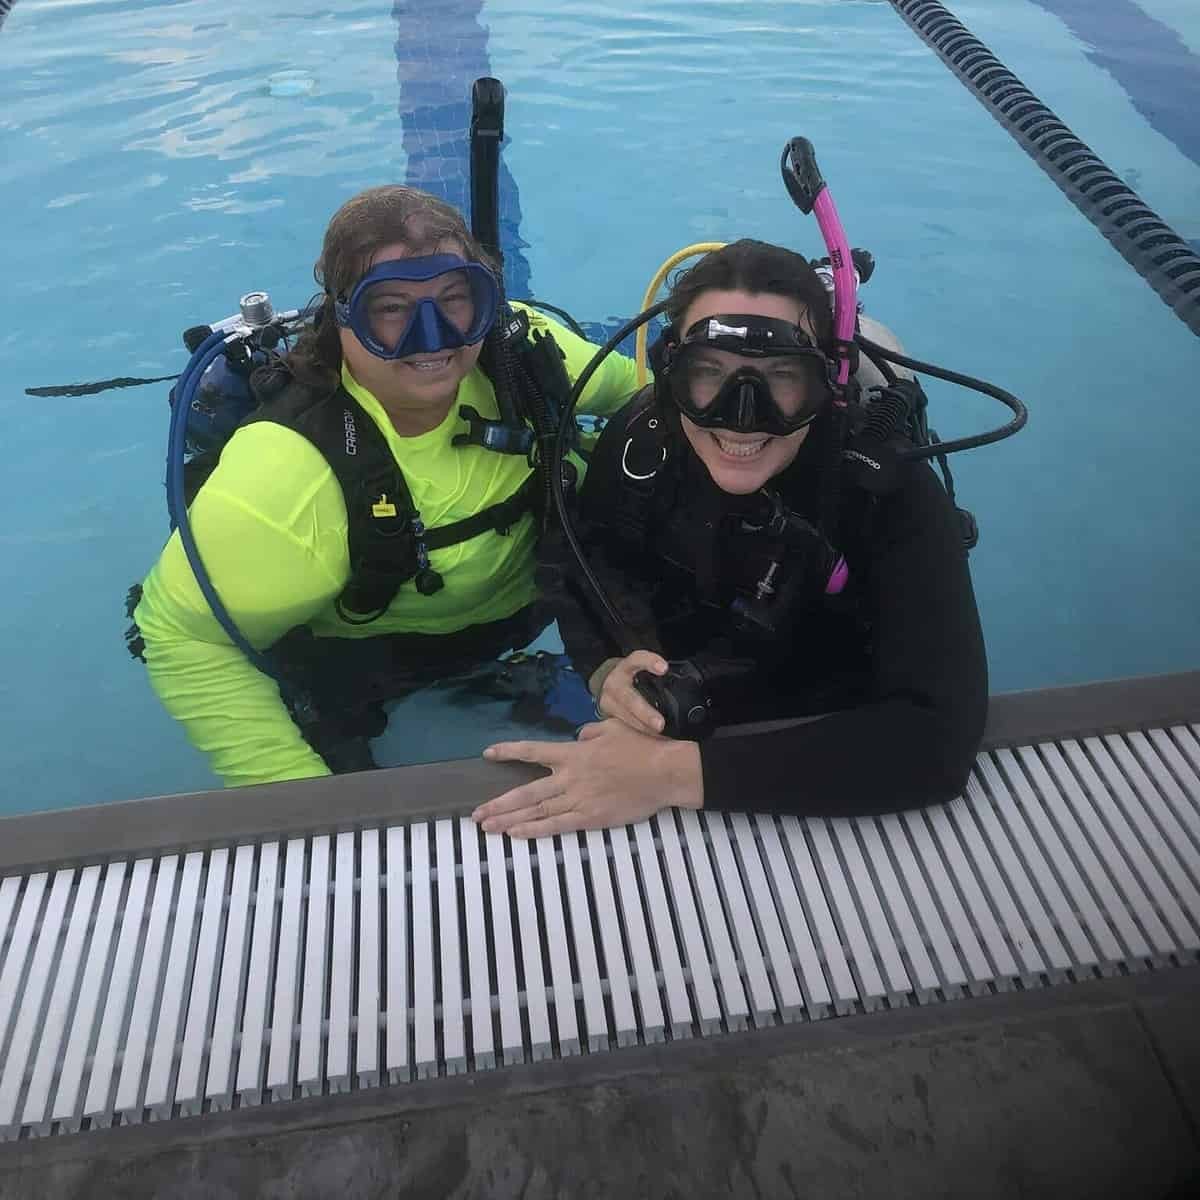 Dive Pirates Recipient Ret. Capt. Karen Katkinson, US Army (right) trains to be an adaptive diver with Teresa Hattaway, owner of Jim's Dive Shop in St. Petersburg, Florida (Image credit: Dive Pirates Foundation)